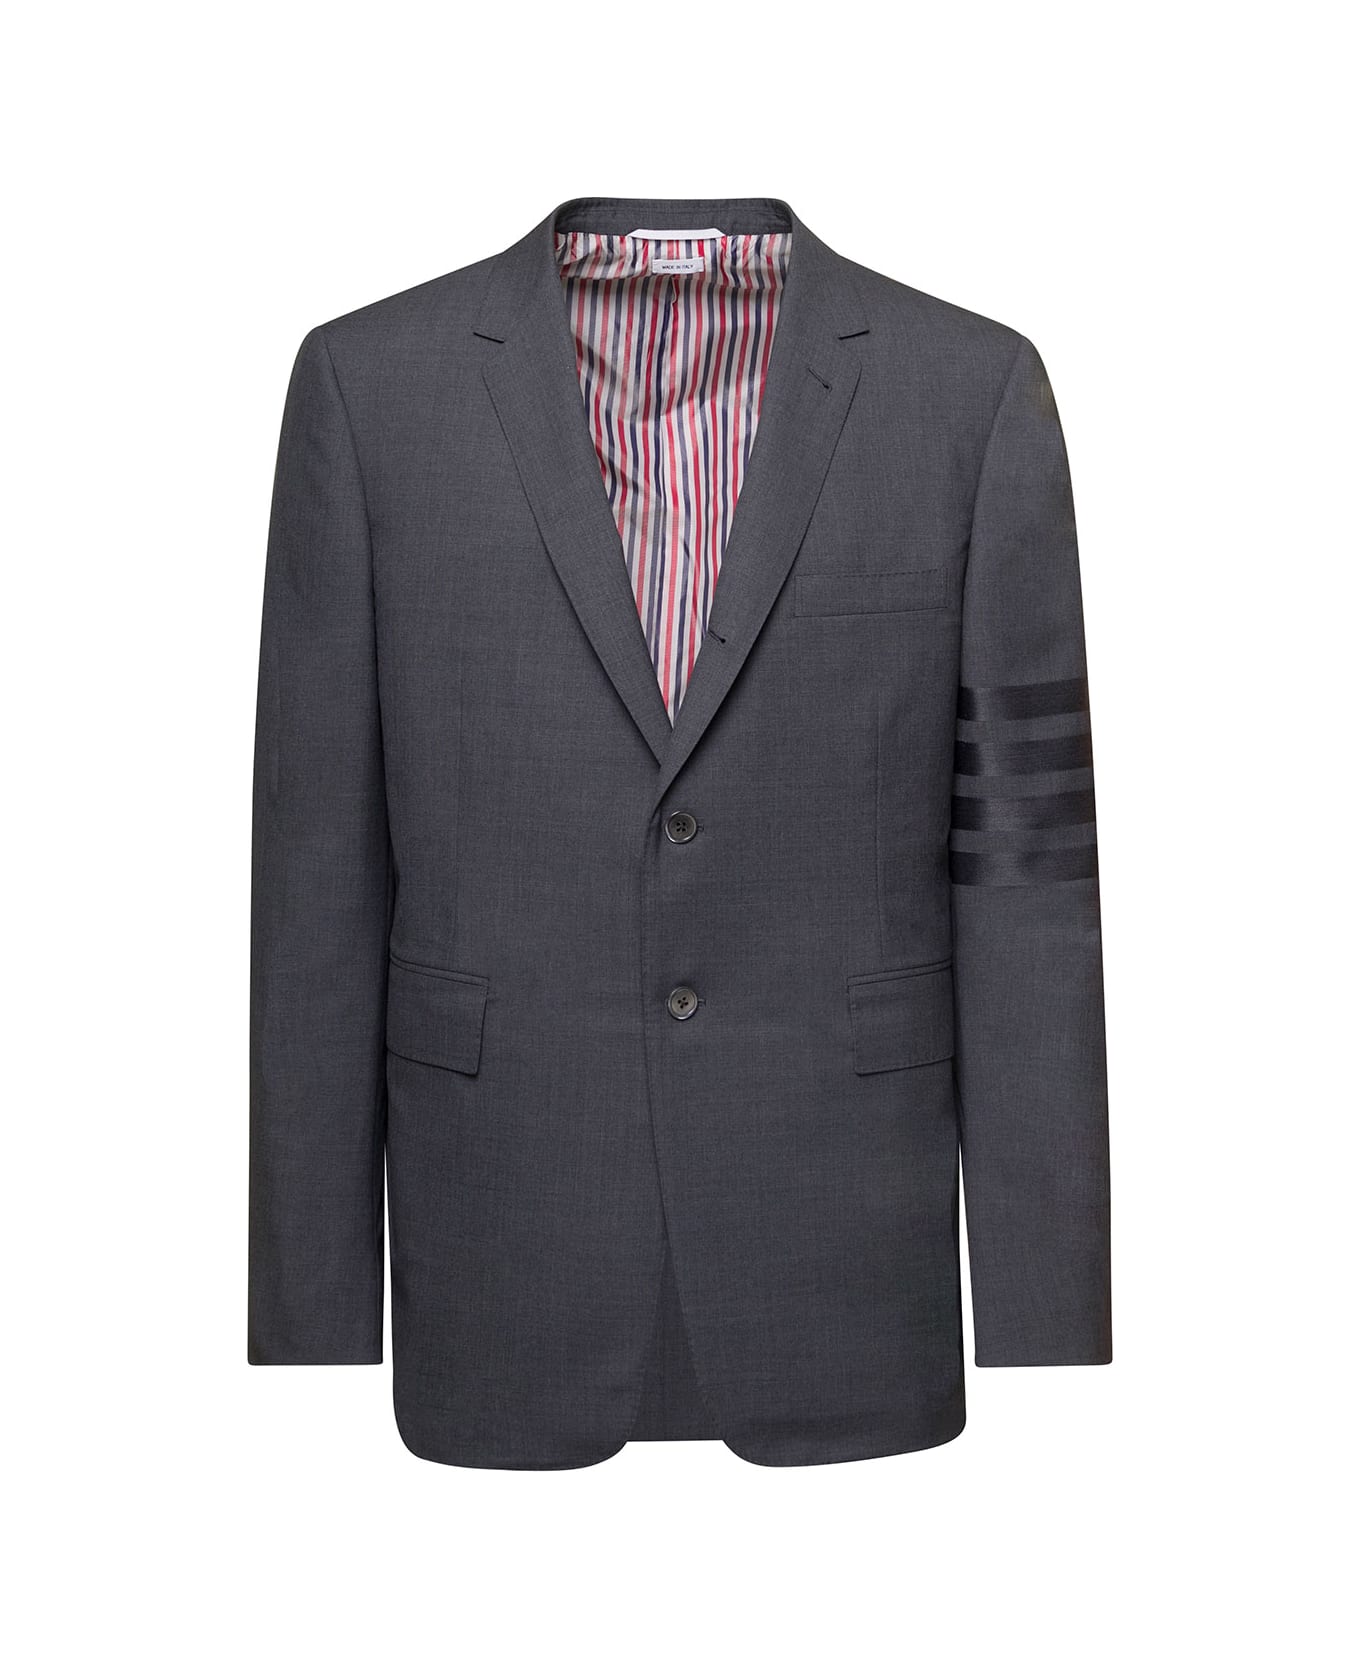 Thom Browne Grey Single-breasted Jacket With Signature 4 Bar Stripe In Wool Man - Grey